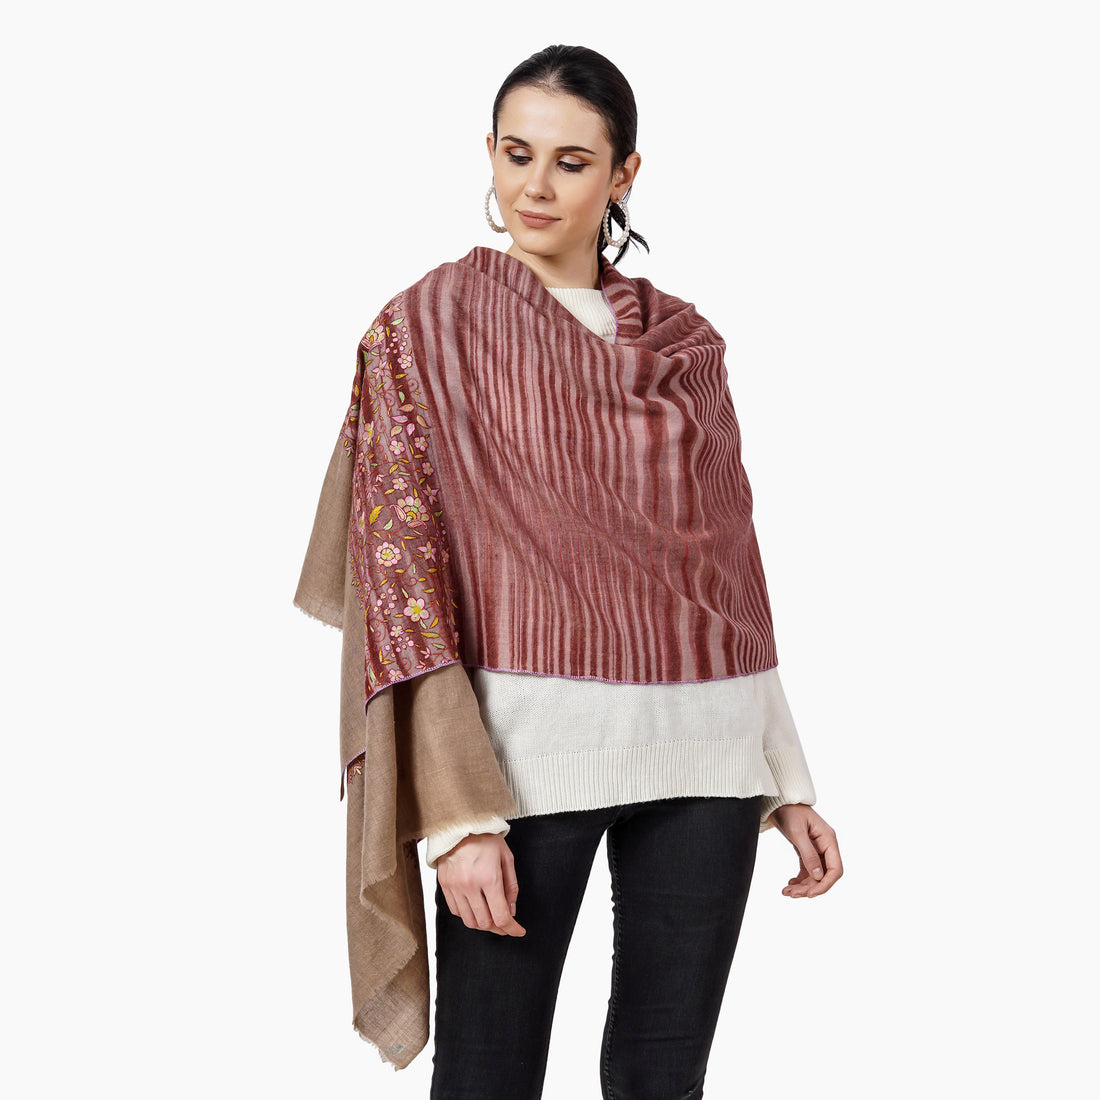 What is pure Pashmina?